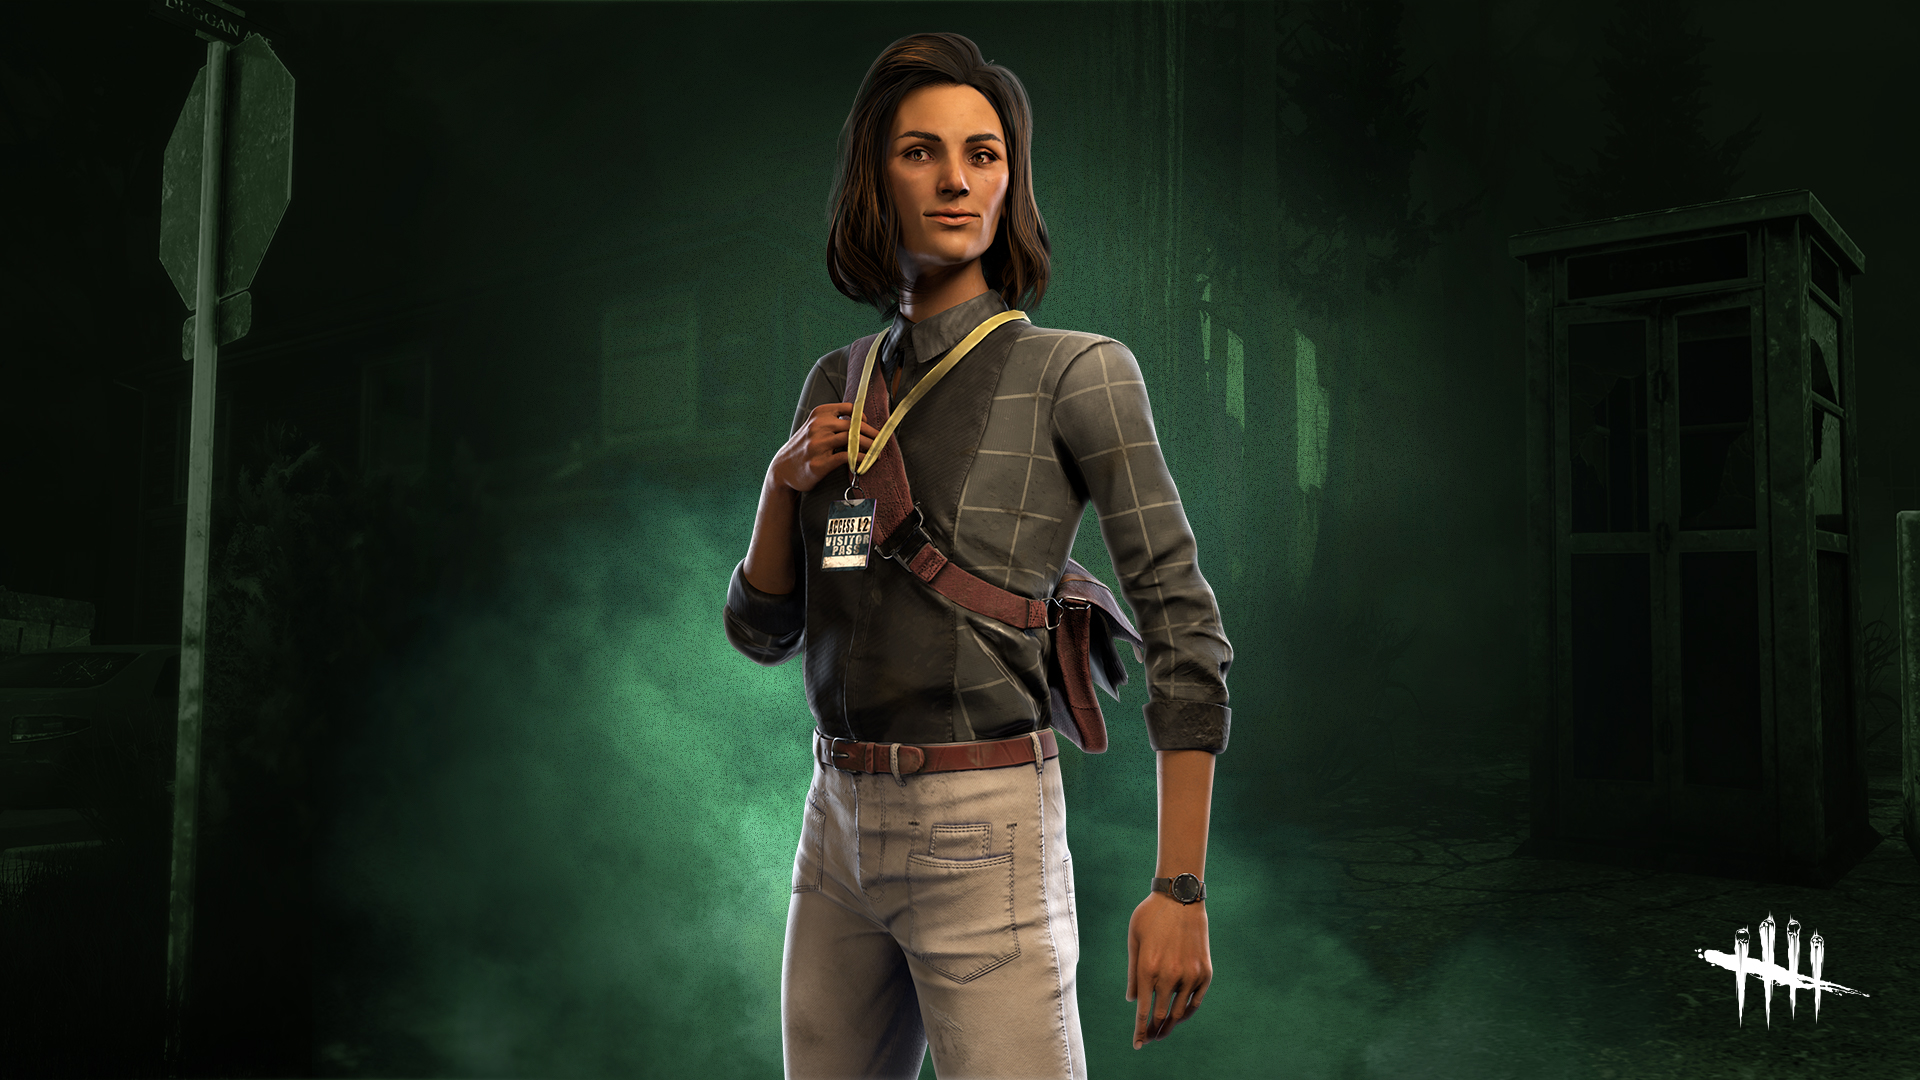 Dead By Daylight In Case You Missed It Check Out Zarina And The Deathslinger New Cosmetics The Grant Applicant And The Frontier Vigilante Both Are Available Through The In Game Store